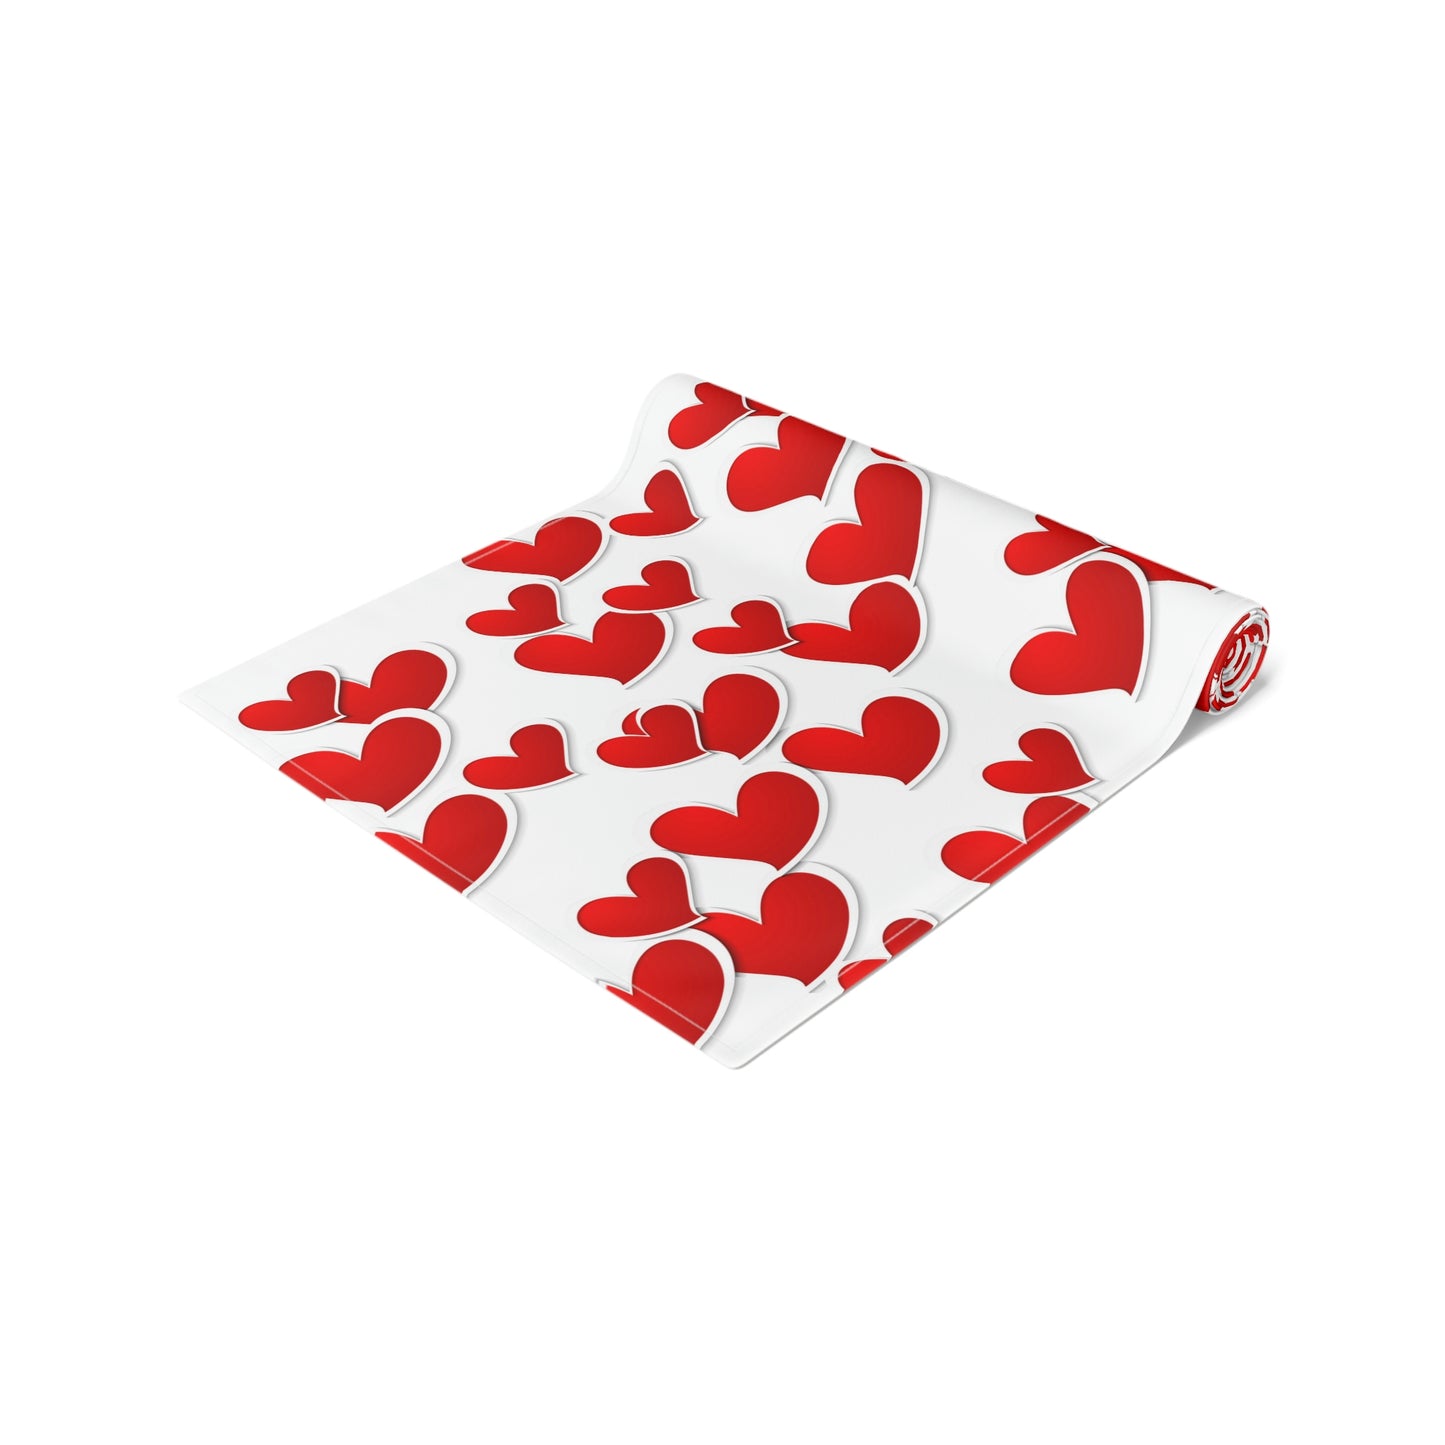 Valentine's Day Table Runner / Heart Print Table Decor / Red Heart Table Runner / Valentine's Day Gifts / Red Heart Decor